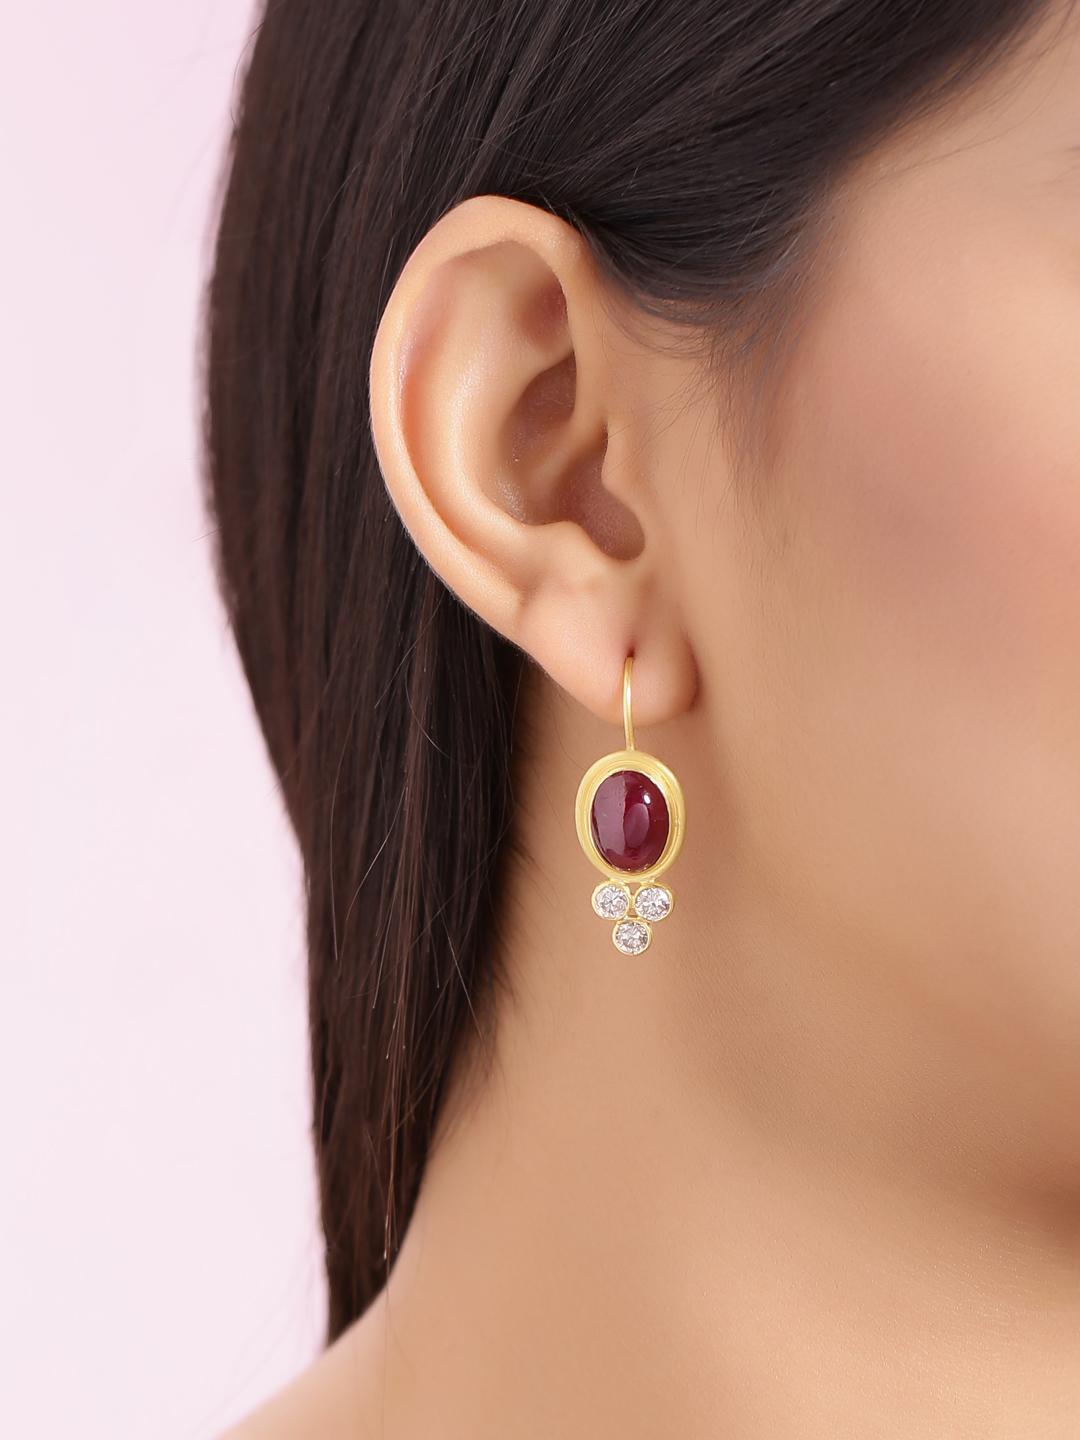 Modern Diamond and Natural Ruby Cabochon Earring Handcrafted in 18 Karat Yellow Gold